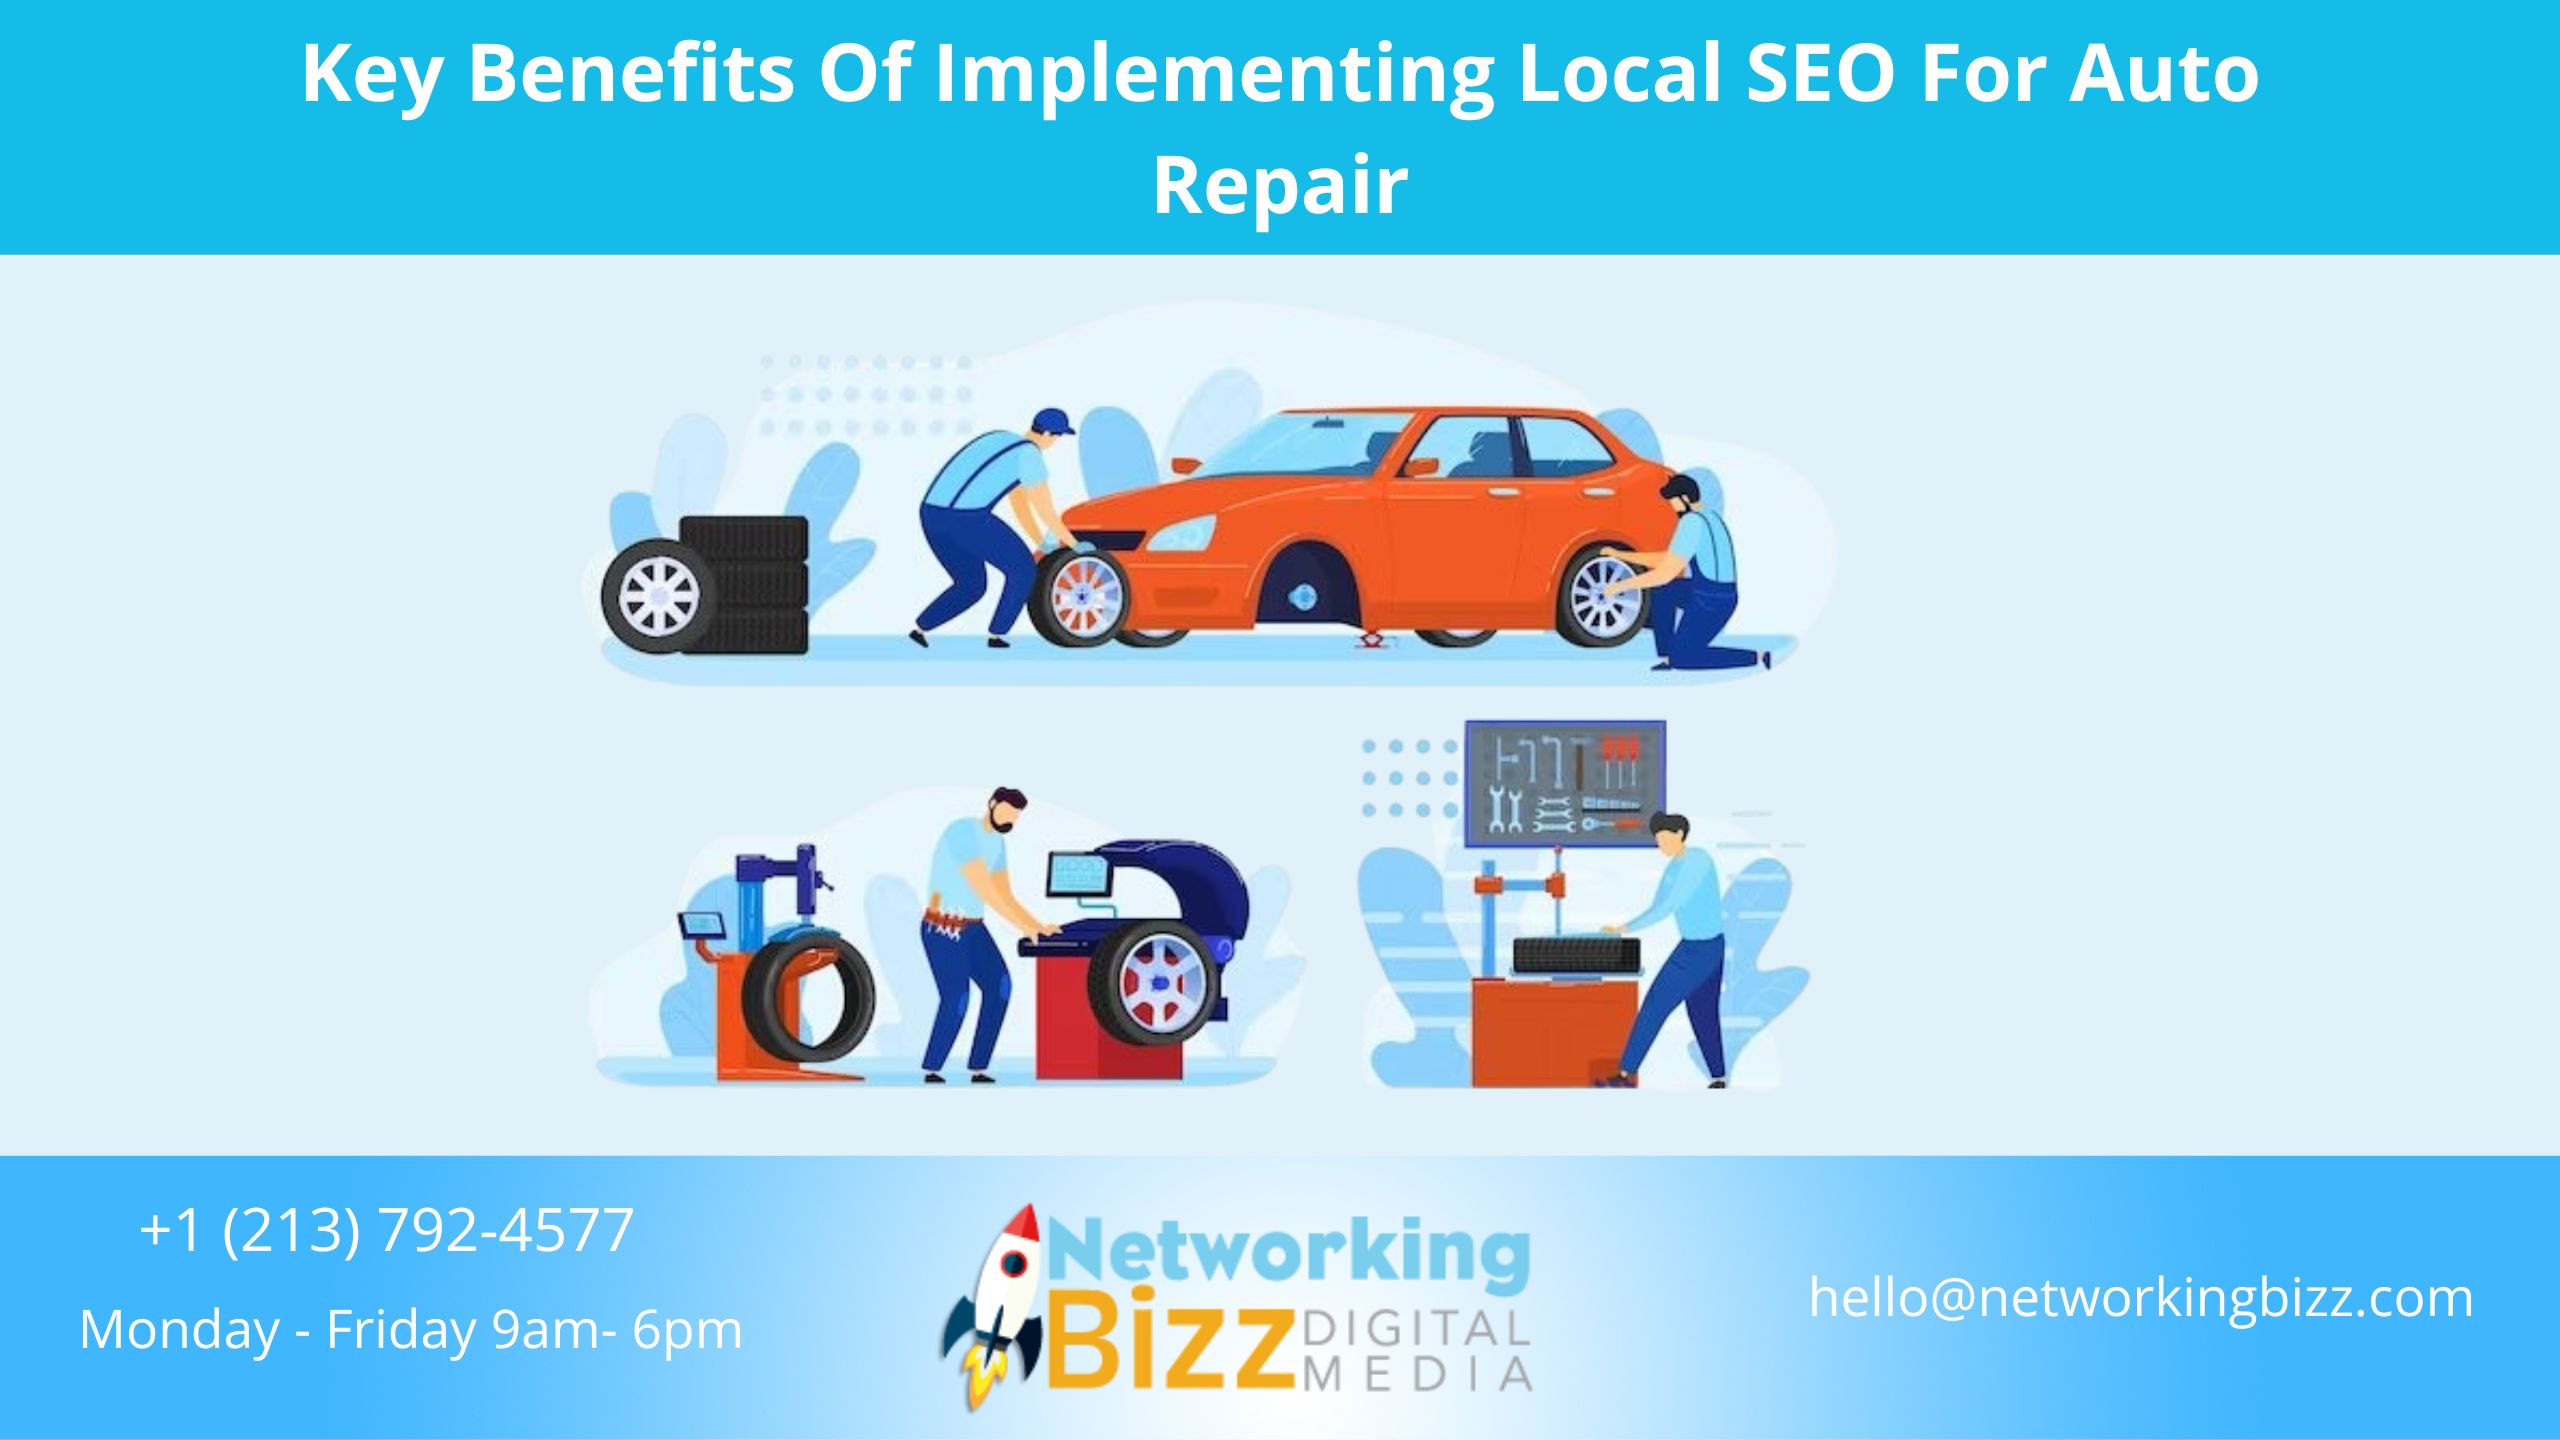 Key Benefits Of Implementing Local SEO For Auto Repair